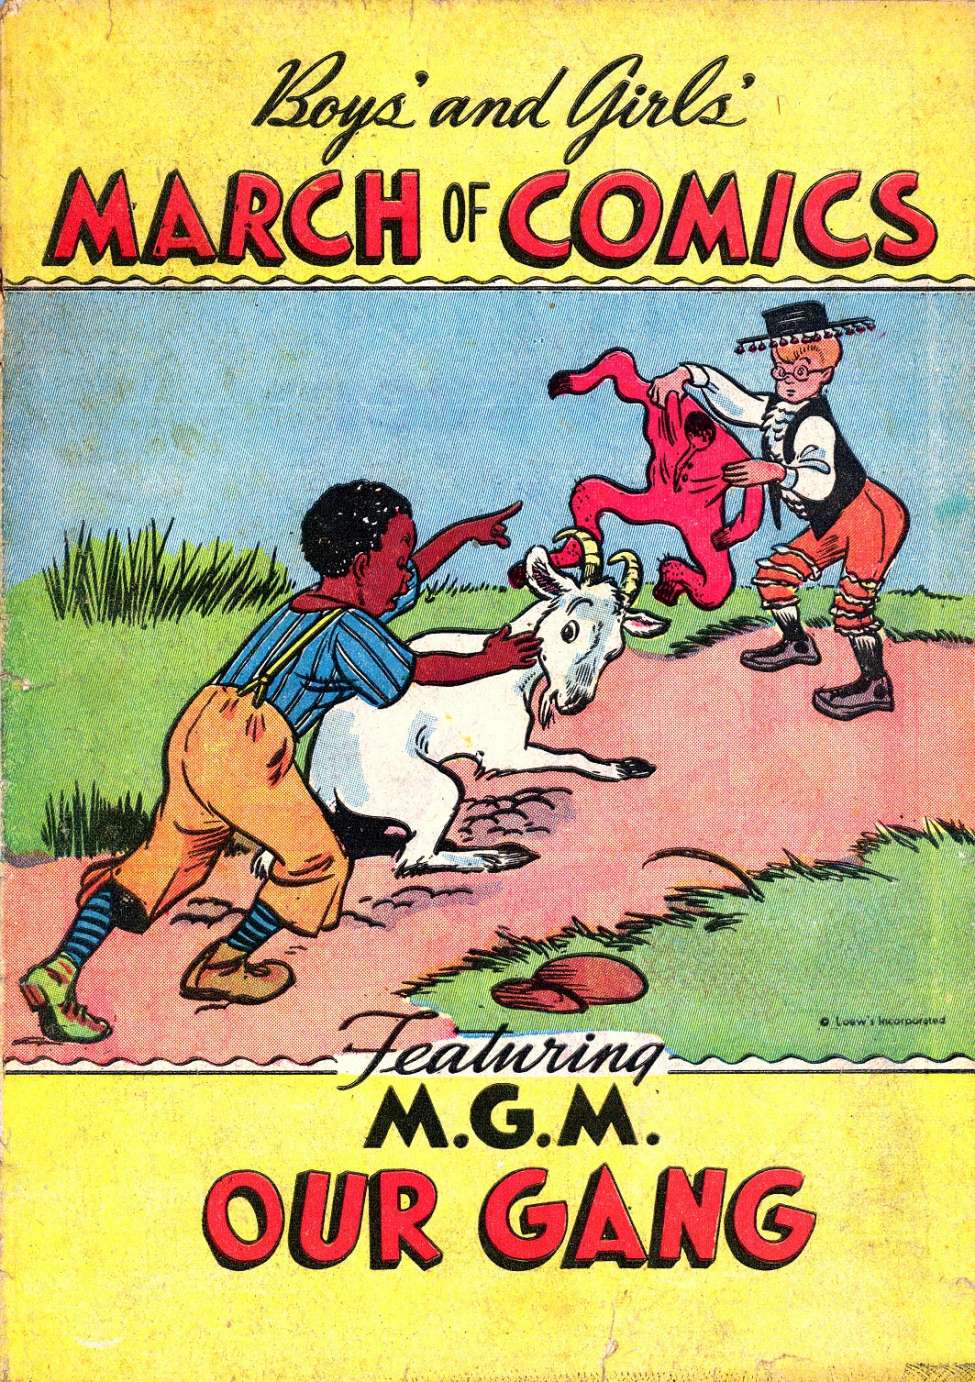 Book Cover For March of Comics 3 - Featuring M.G.M Our Gang